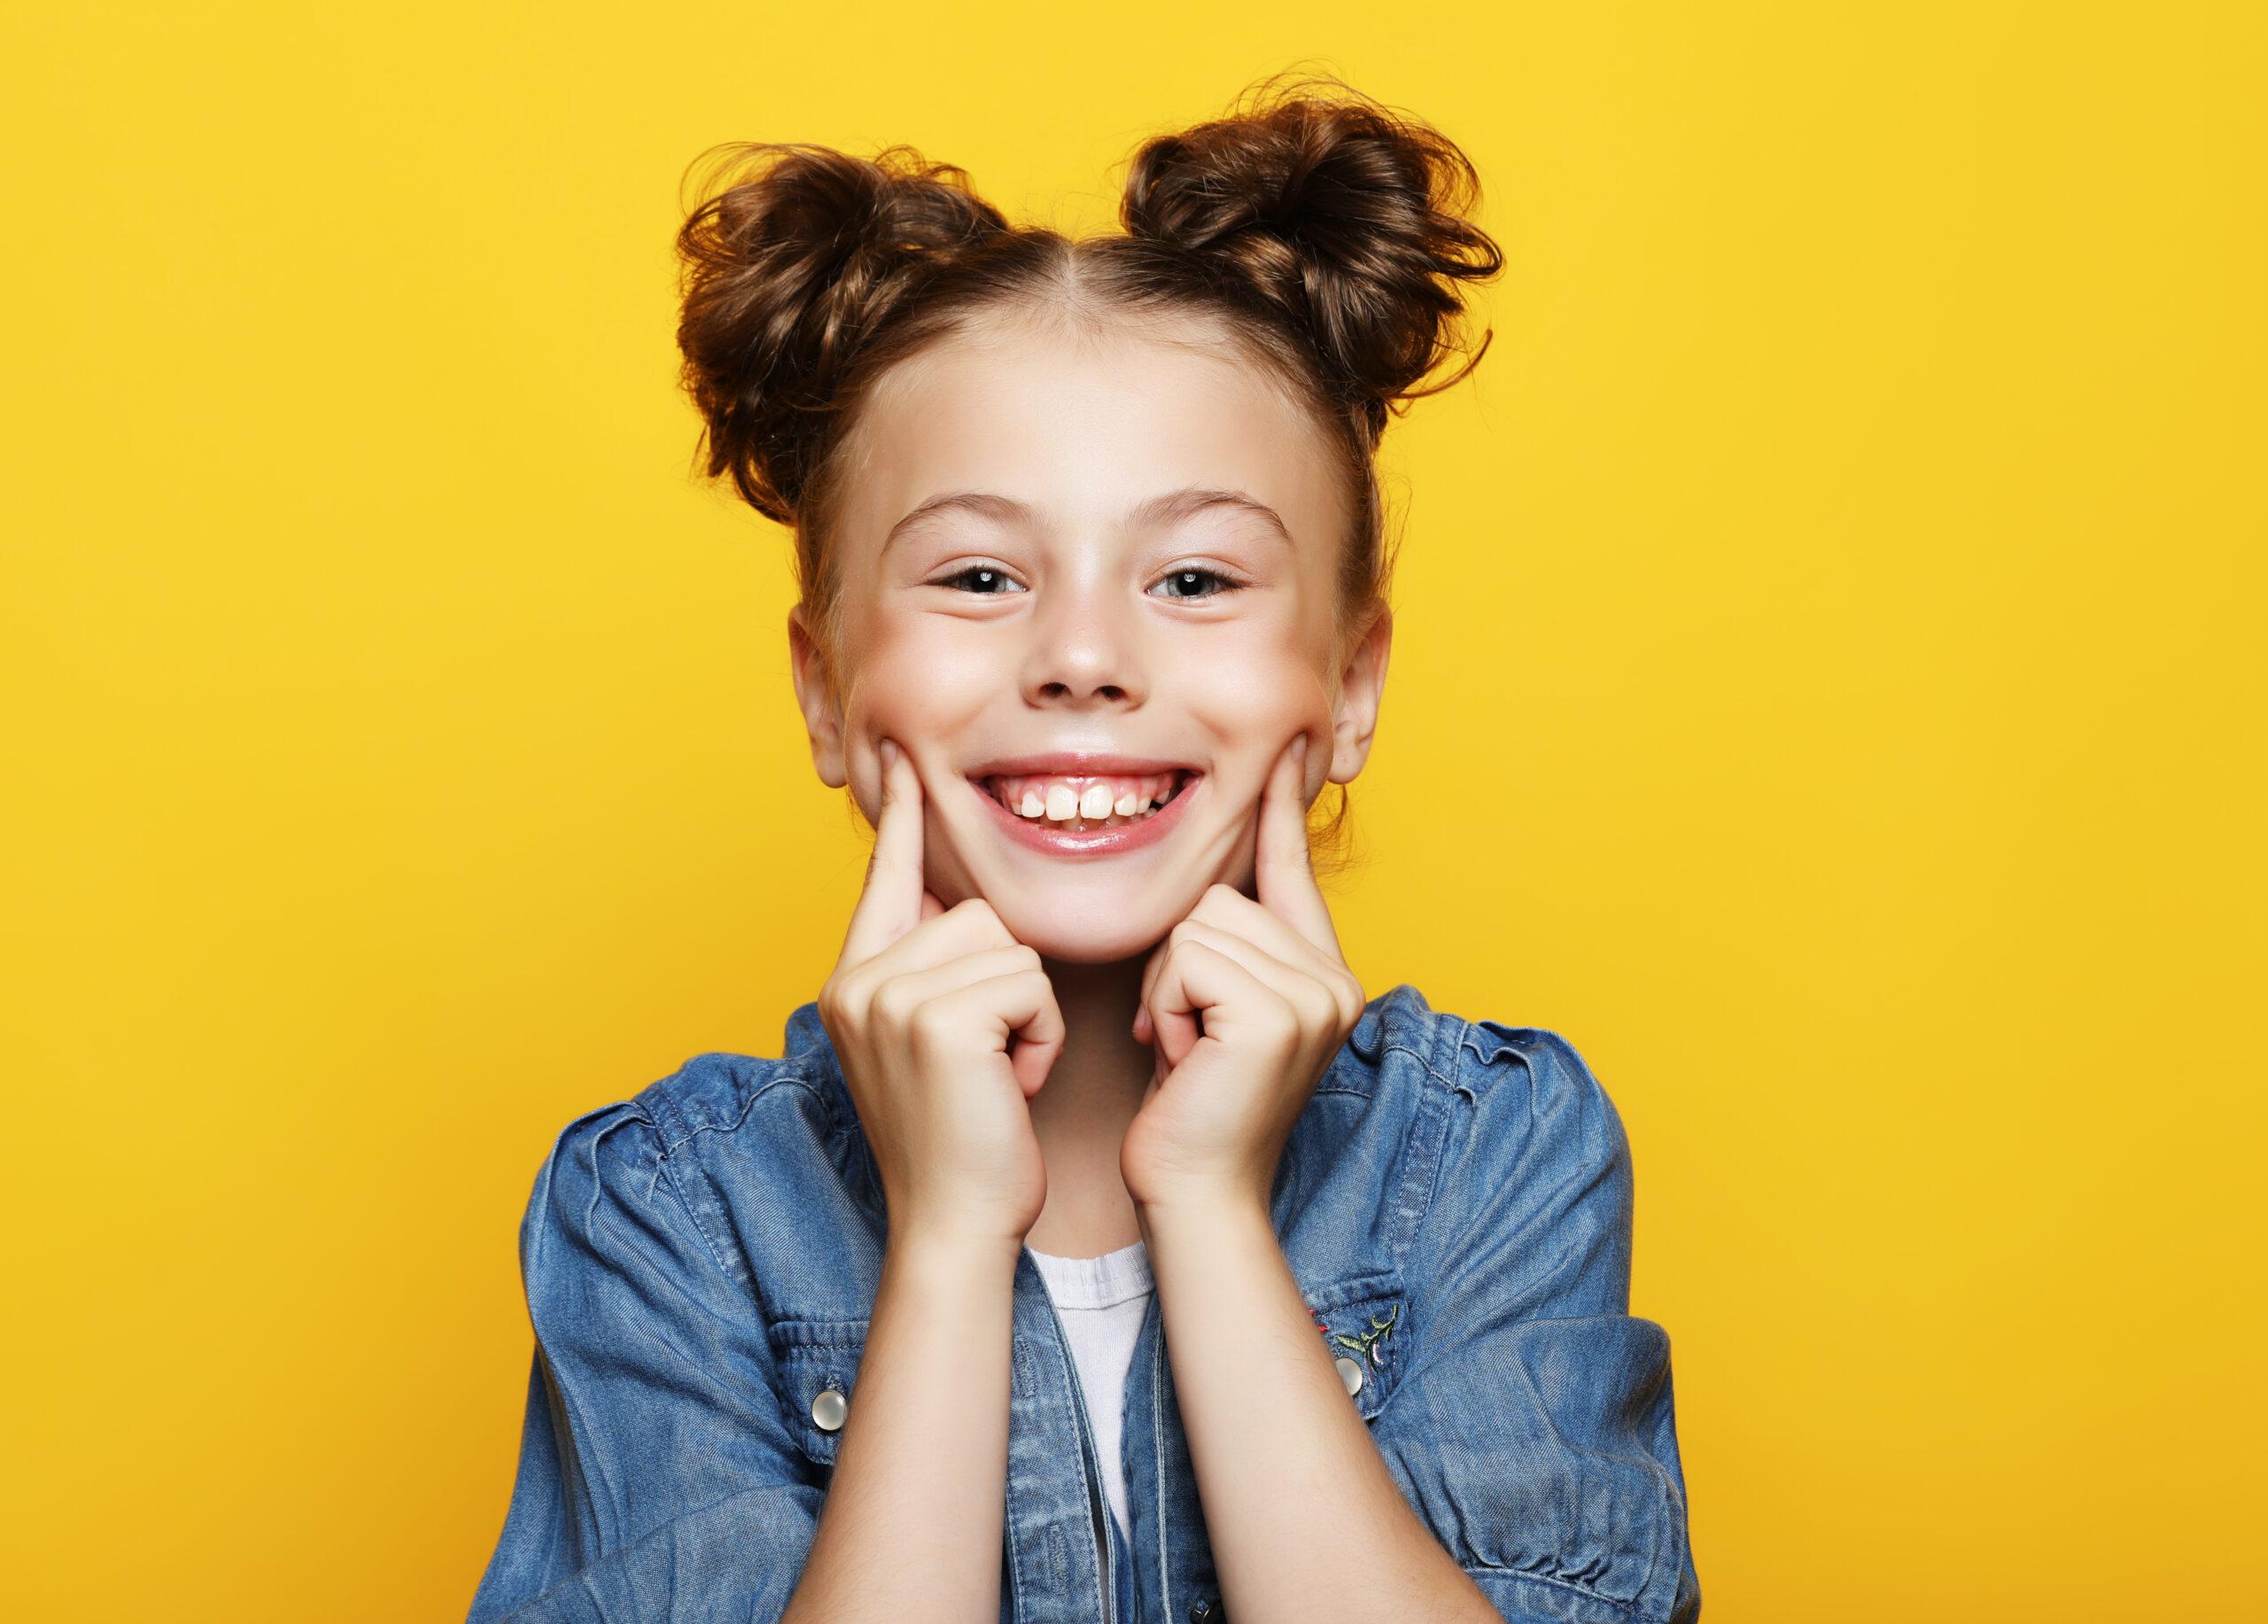 emotion, childhood and people concept: Portrait of cheerful smiling little girl on yellow background